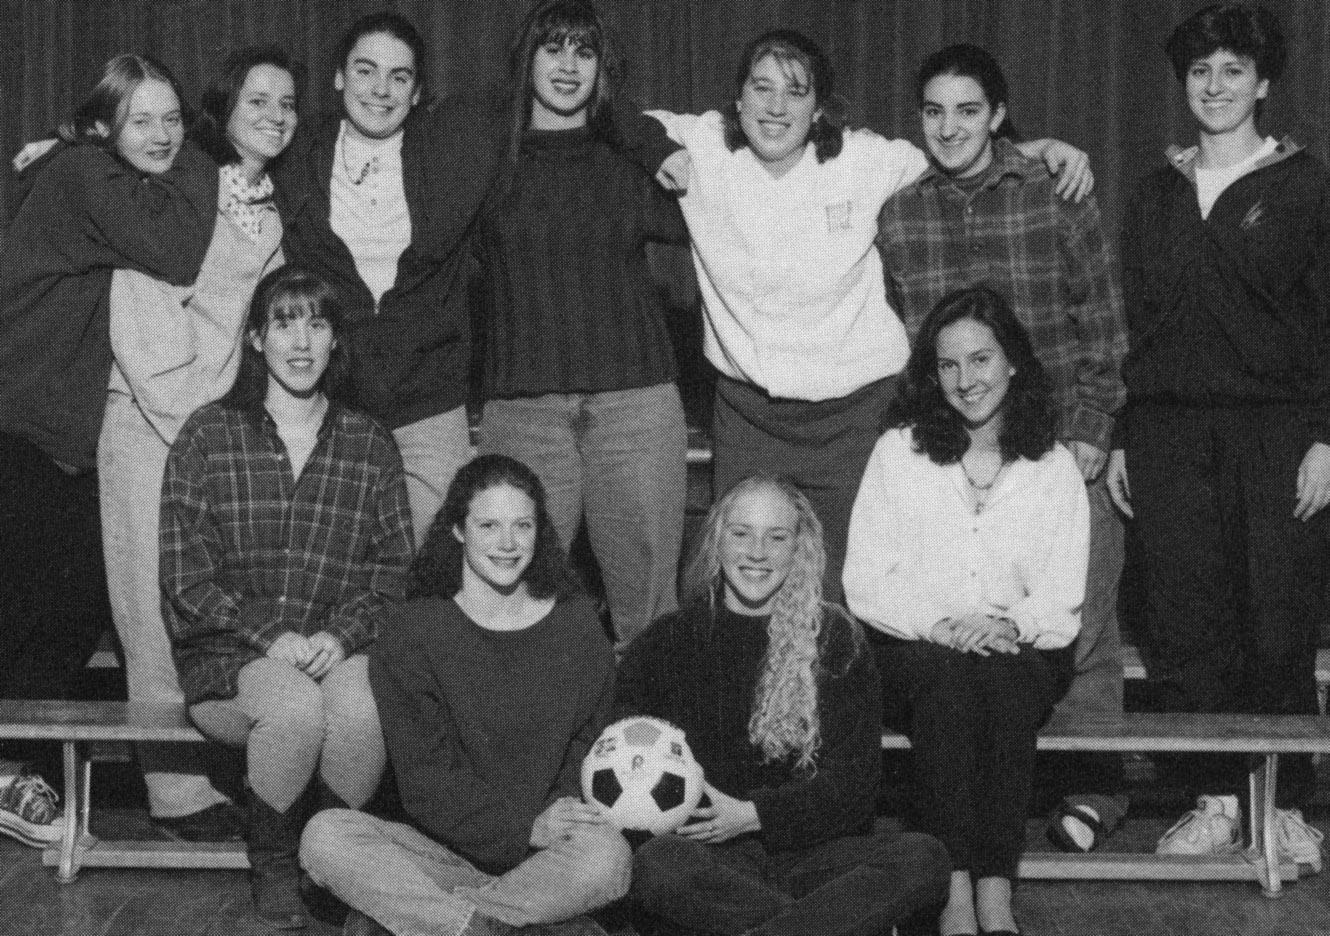 (Click to magnify) FRONT ROW: Lindsay Connell, Maggie Evans, Sarah Armstrong, Stephanie Melnyk; SECOND ROW: Jill Ballinger, Michelle Featherstone, Steph Smith, Julia Kelland, Brianne Lake, Quenby Barris, Ms. Roberts; ABSENT: Ursula Codd, Sara Dart.